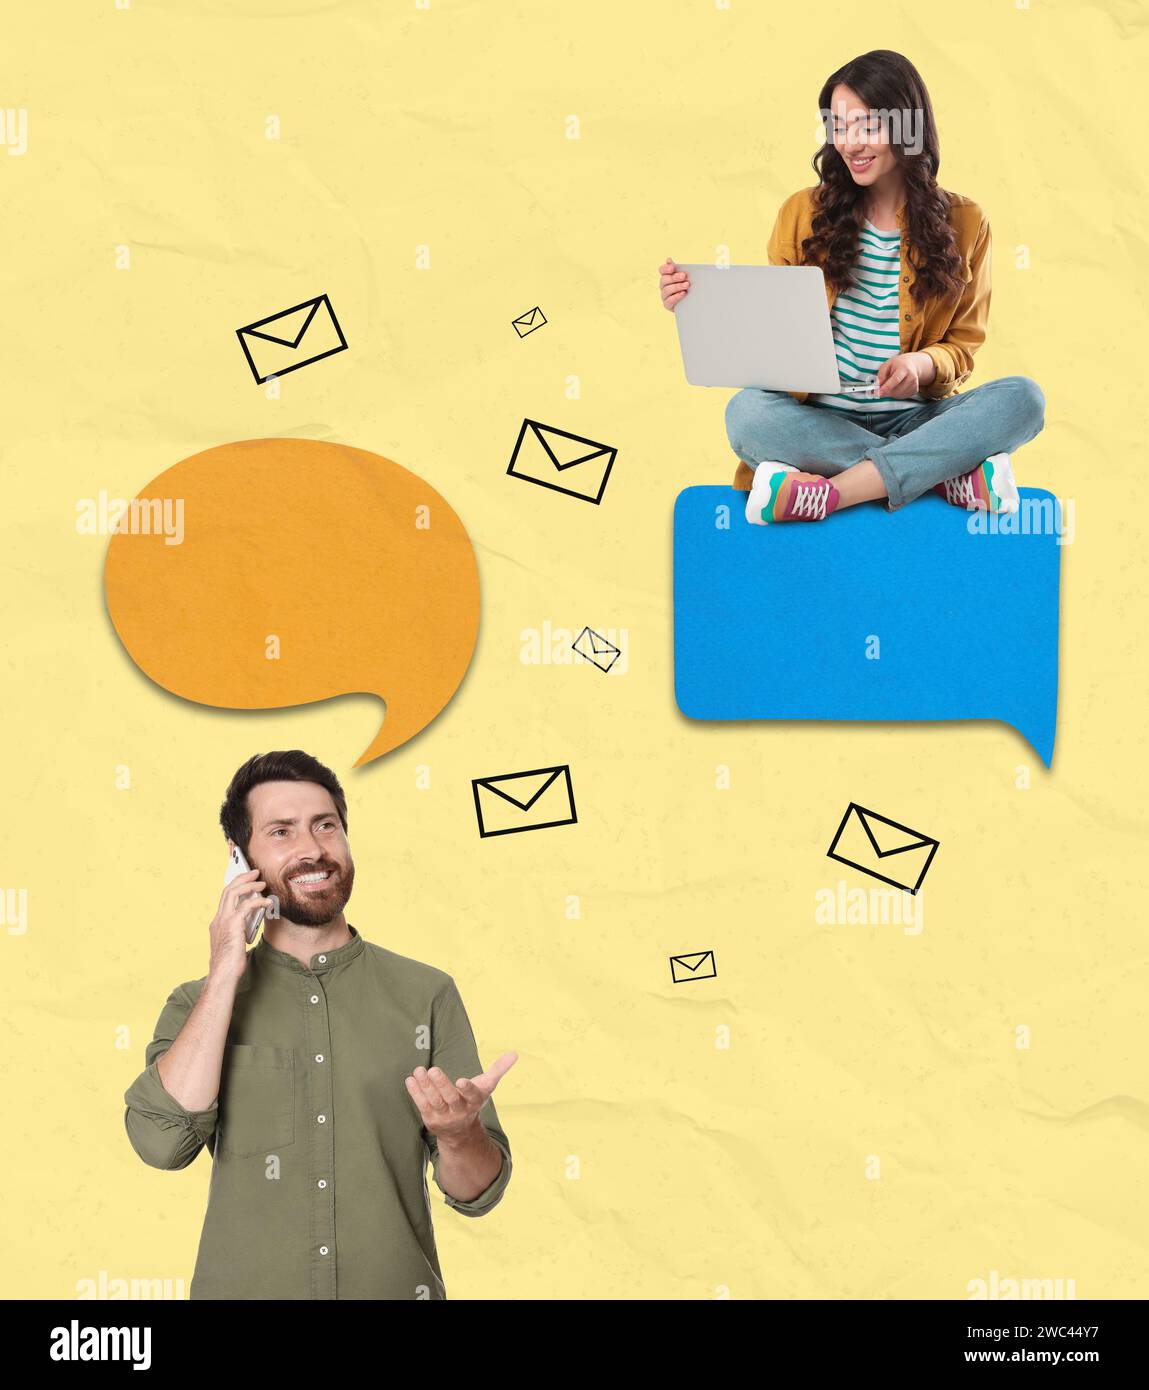 Dialogue. Woman with laptop and man talking on mobile phone on color background. Speech bubbles and letter illustrations near them Stock Photo